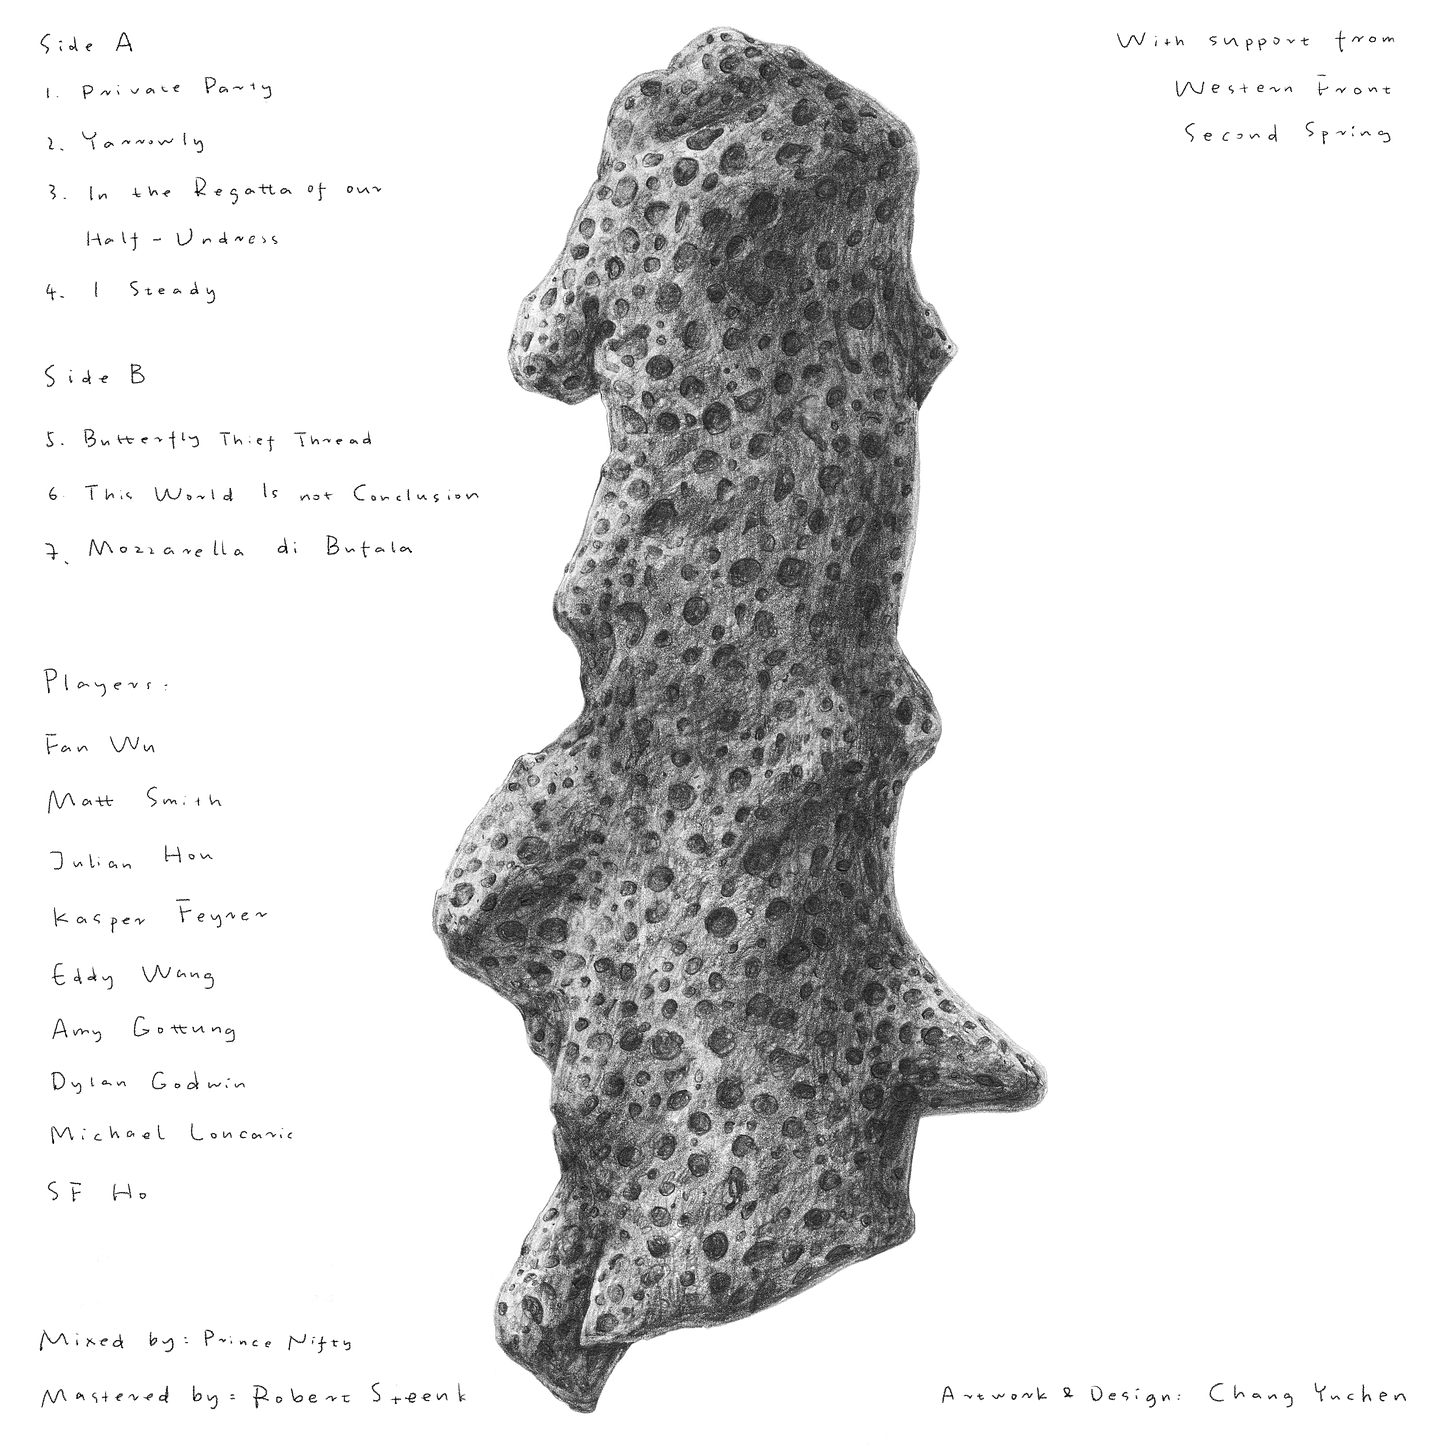  A graphite drawing of a piece of coral against a white background. Track listings and album credits are handwritten in pencil around the coral.